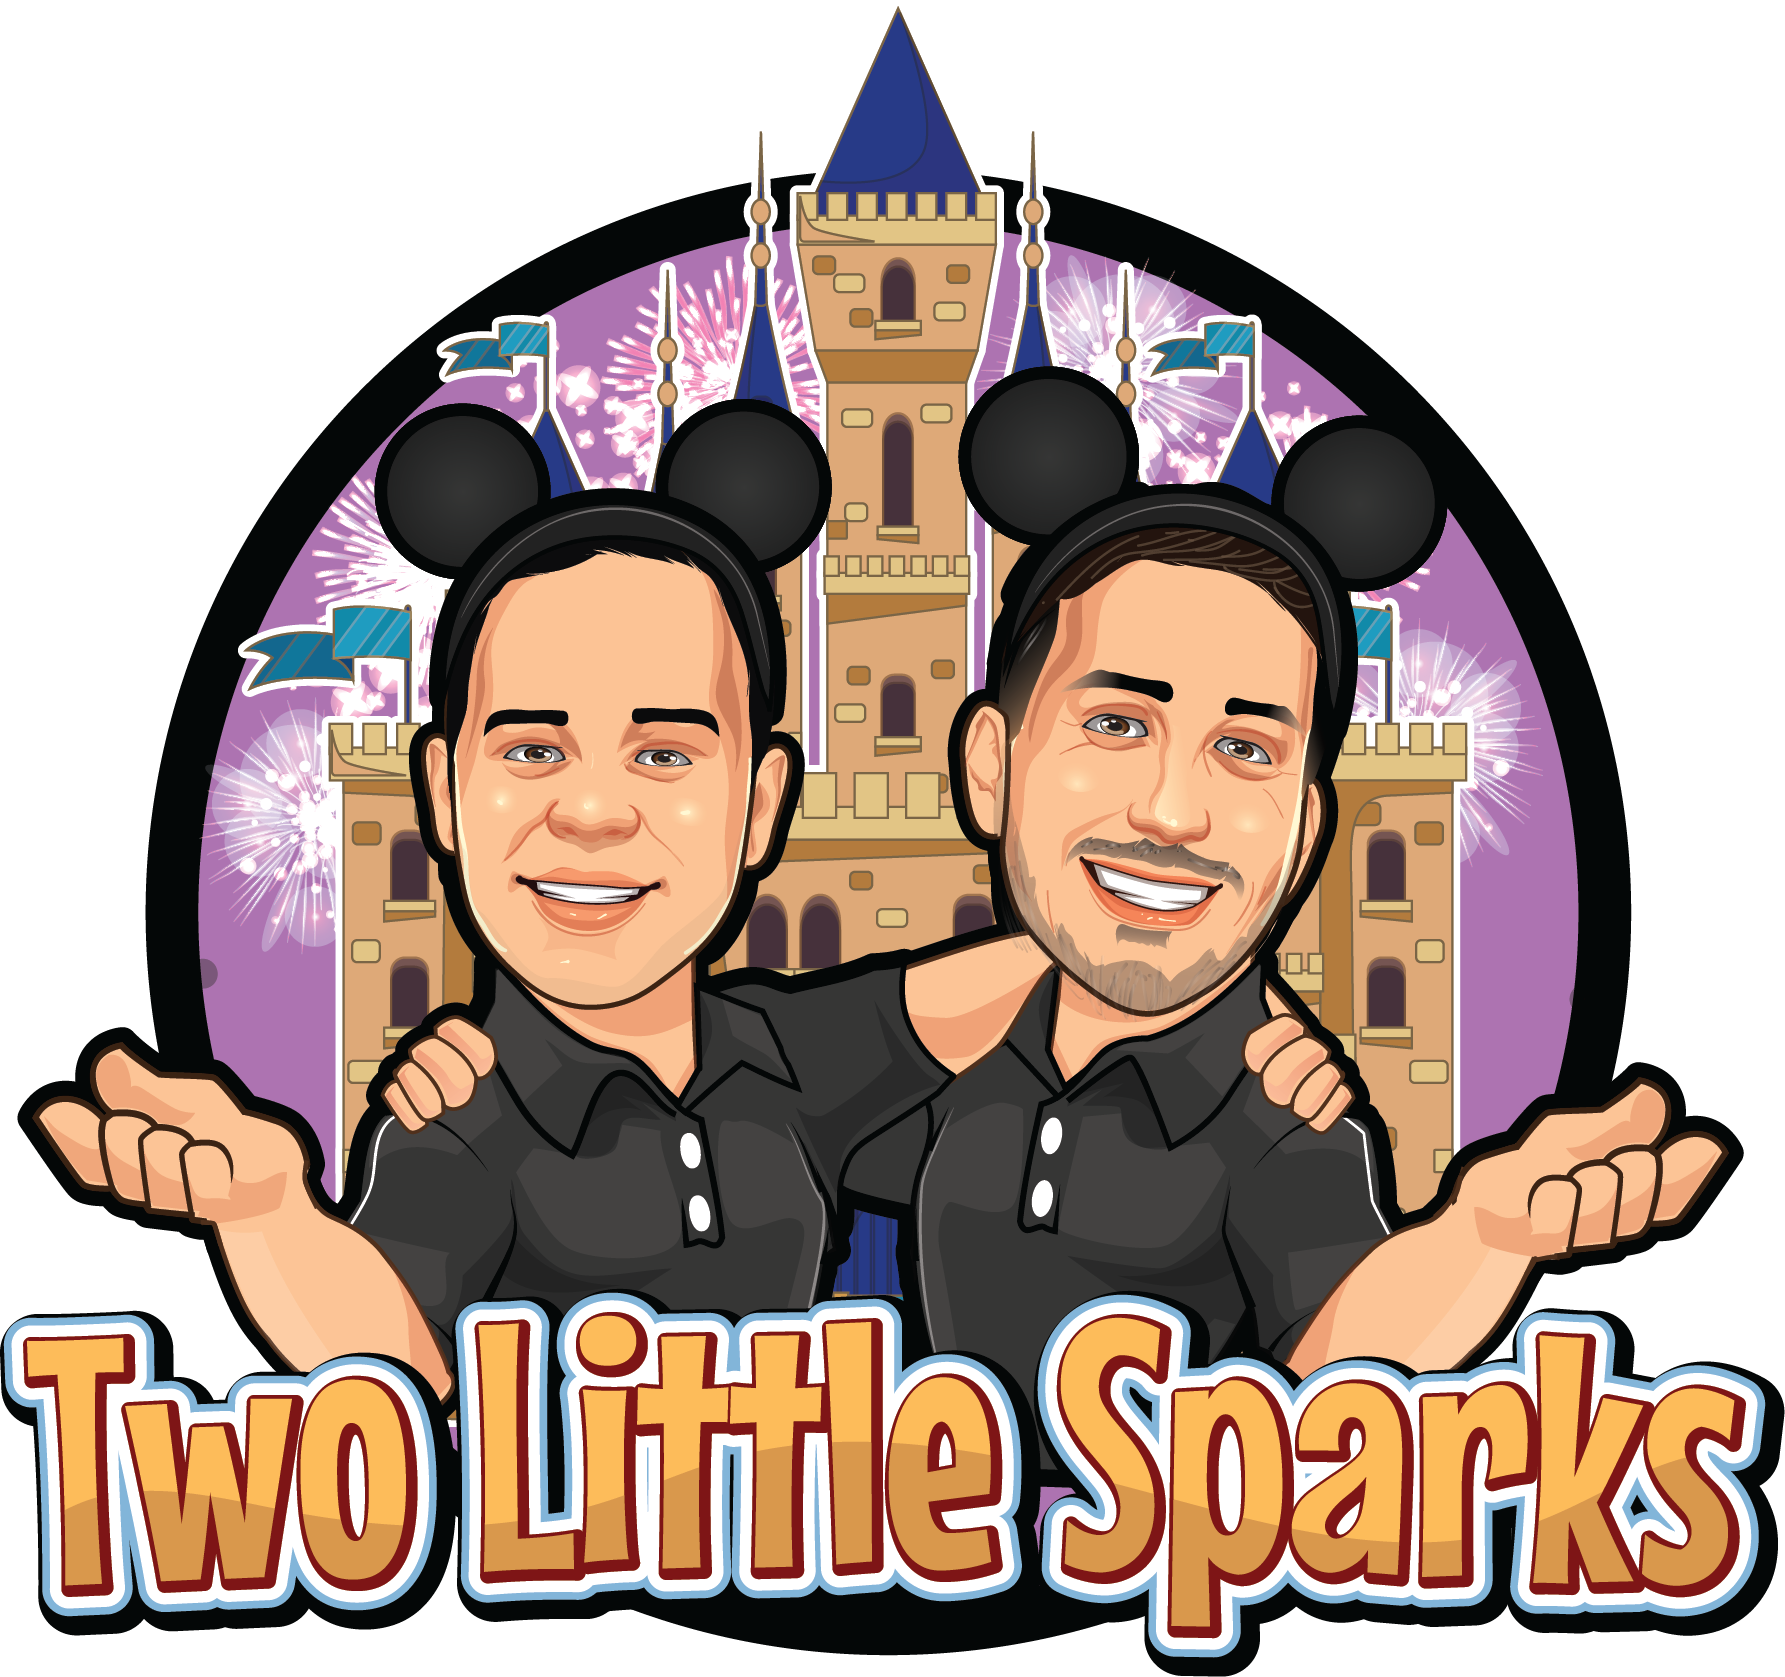 Two Little Sparks logo